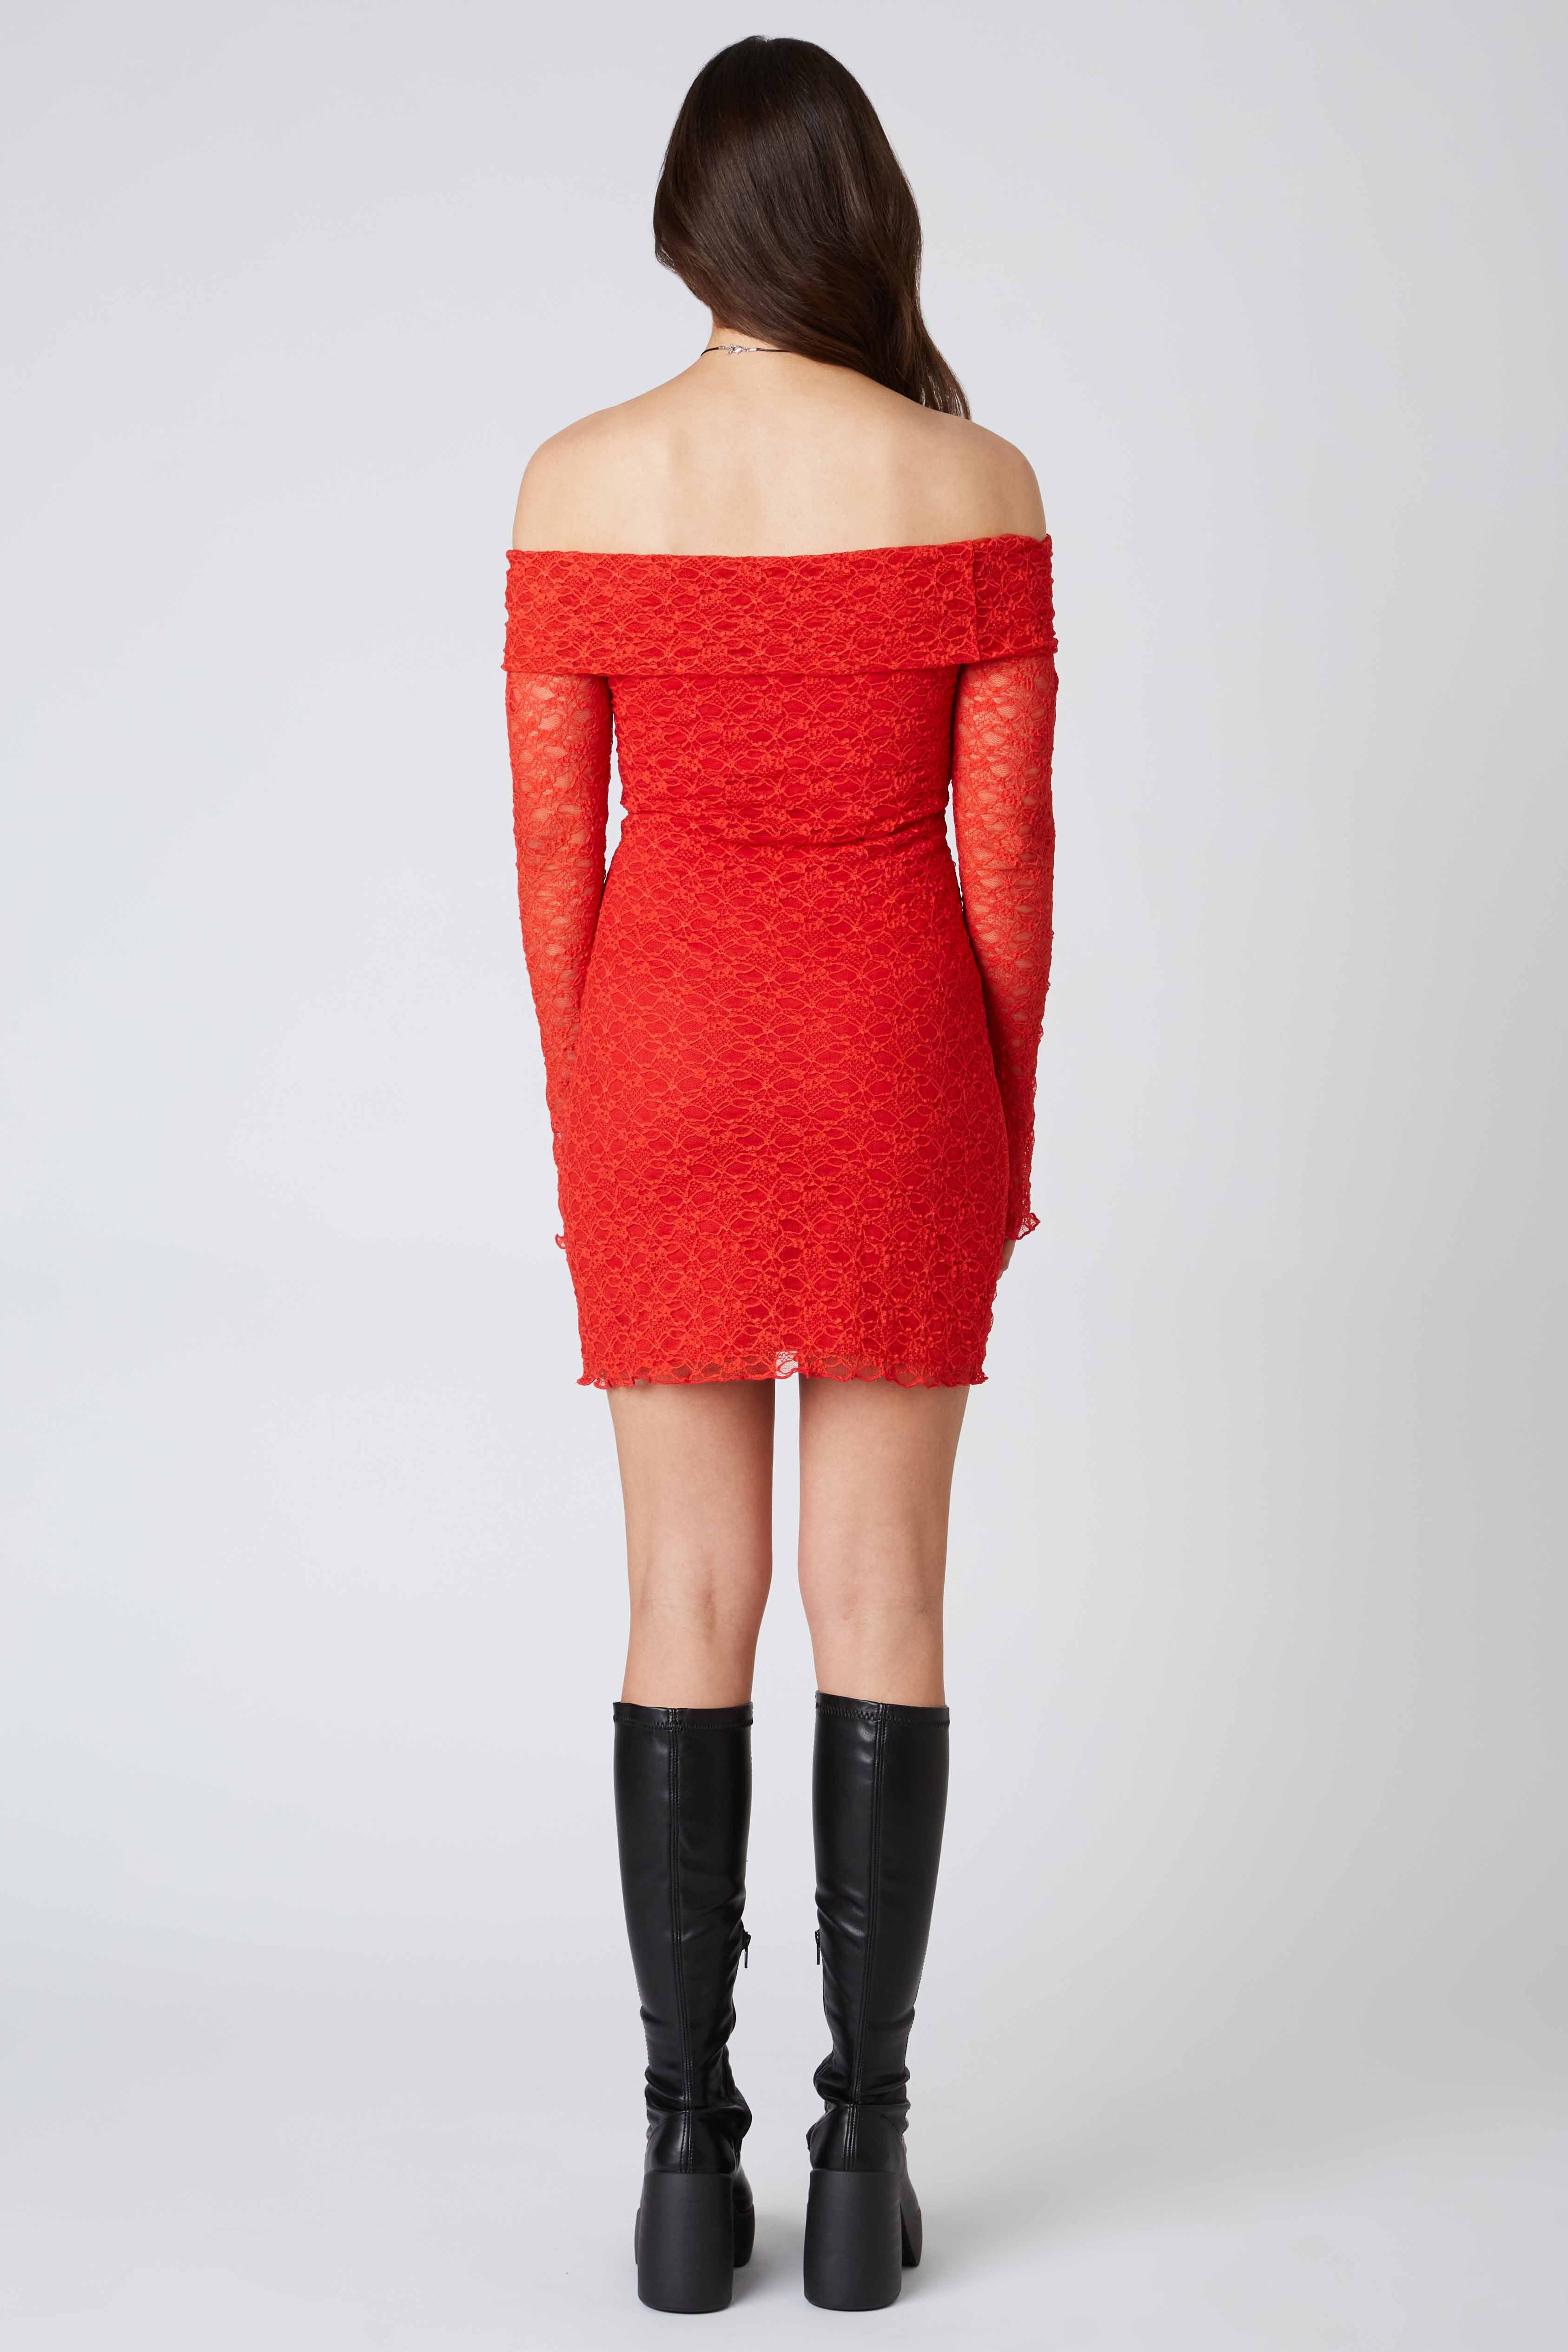 Off the Shoulder Lace Mini Dress in Red Back View